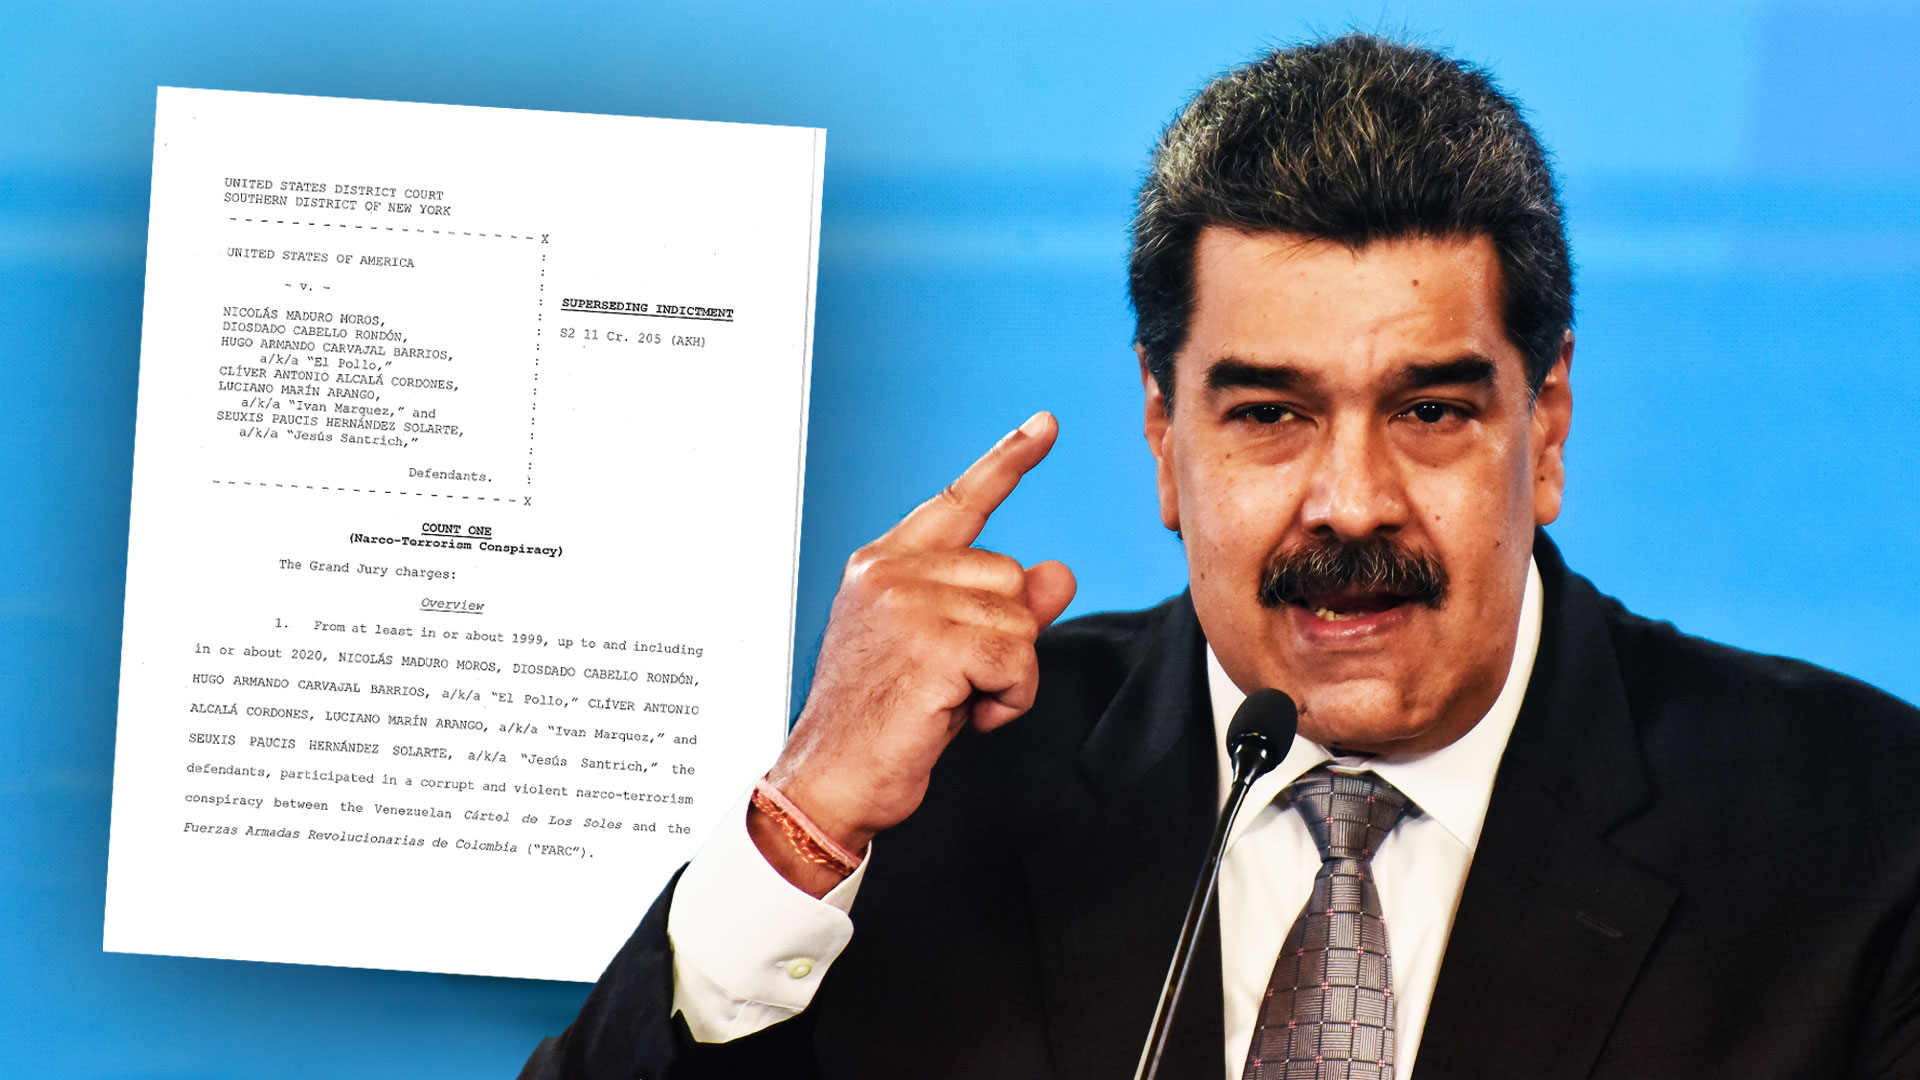 Nicolás Maduro and the formal accusation of the prosecutor's office for the Southern District of New York